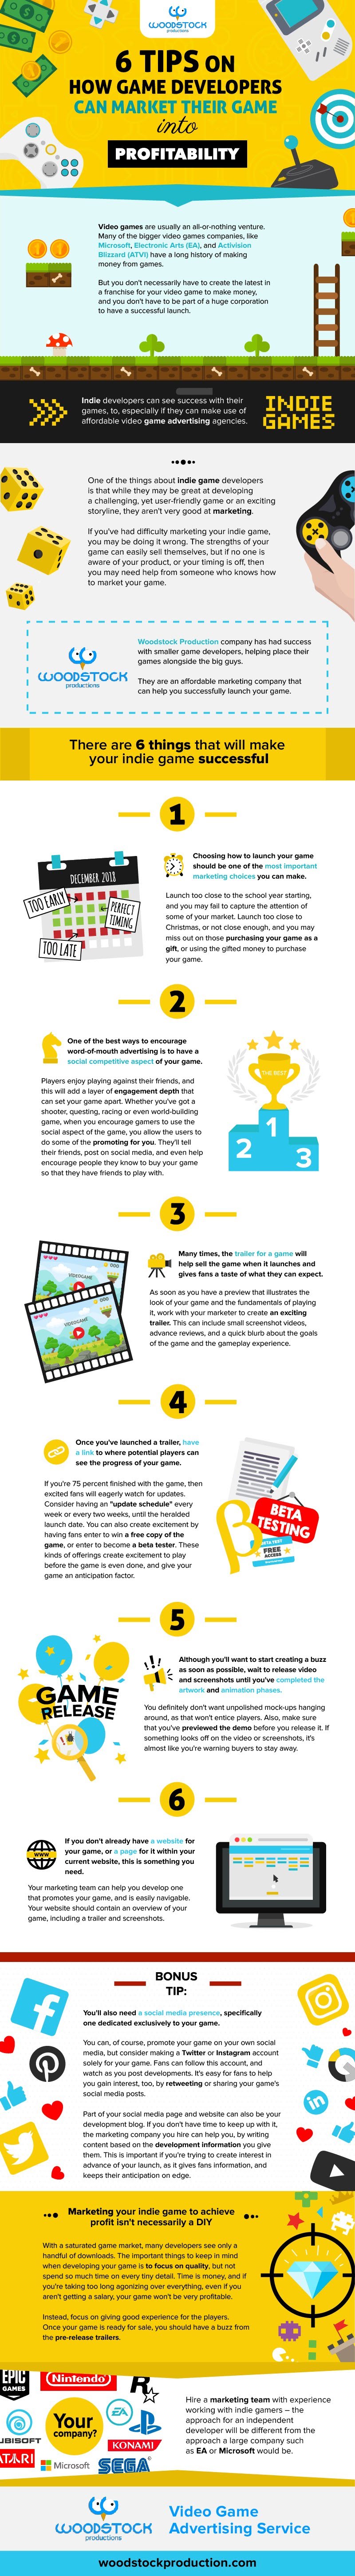 6 Tips On How Game Developers Can Market Their Game Into Profitability #infographic